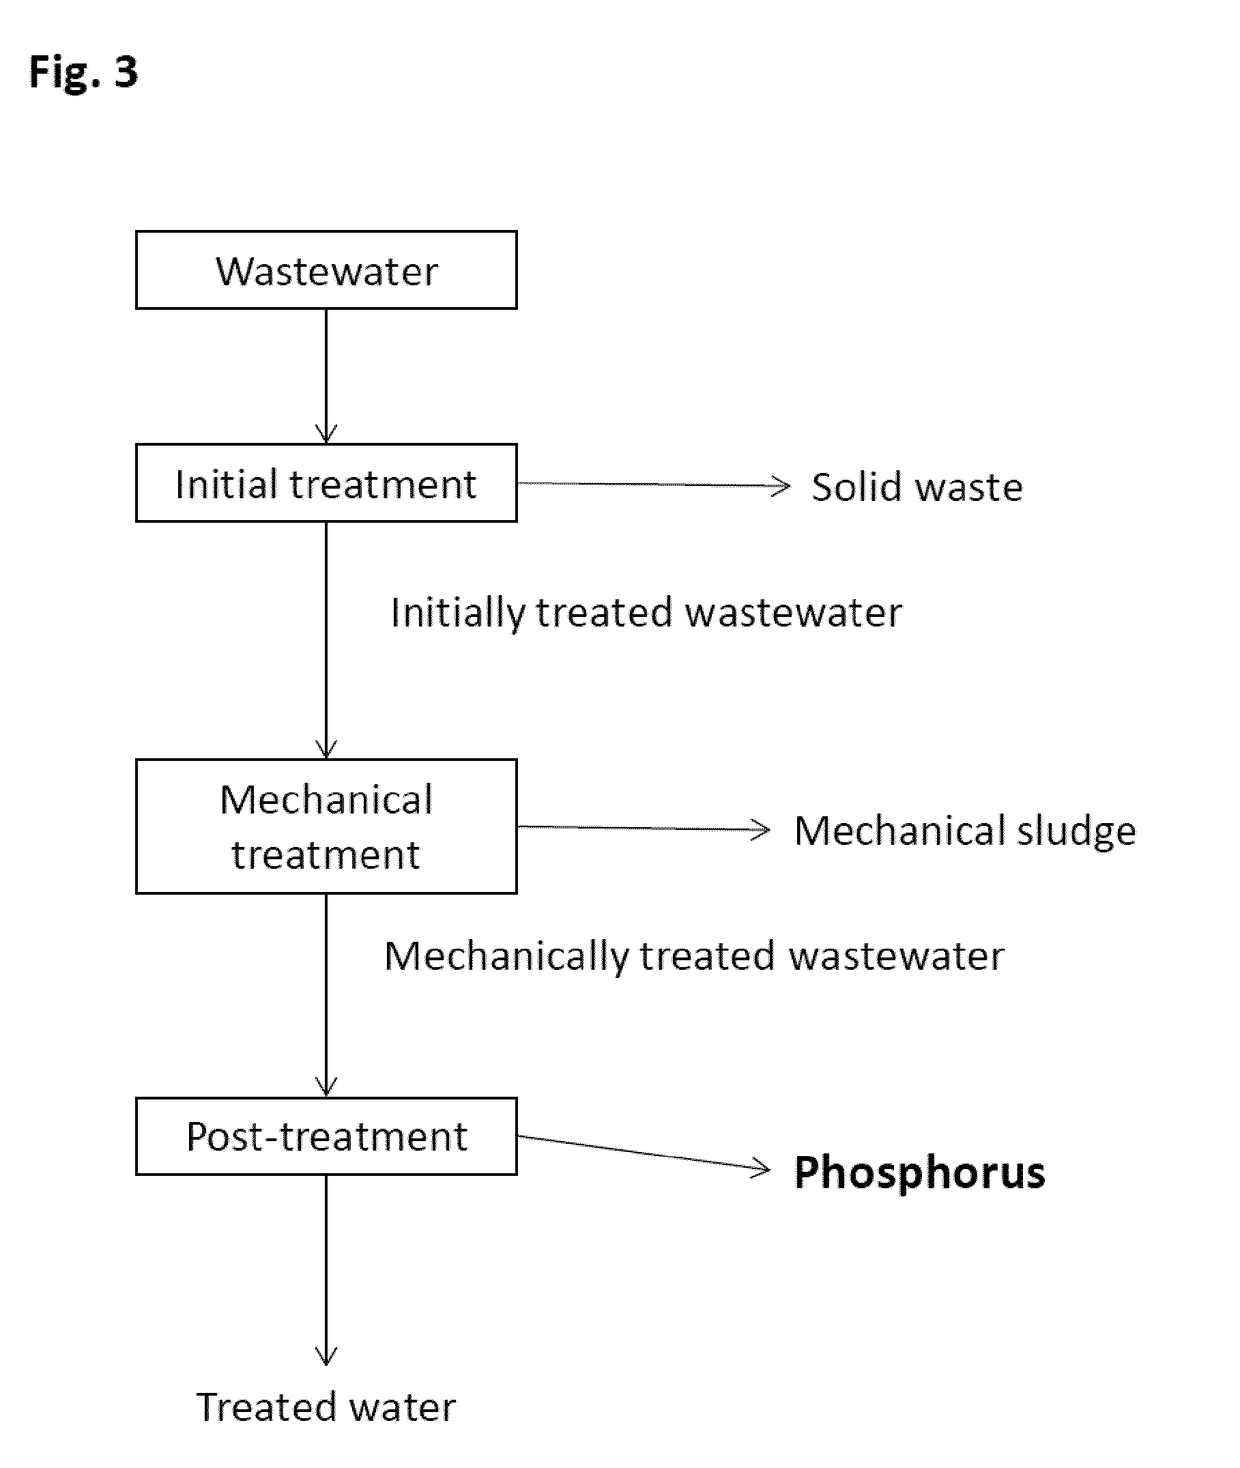 Recovery of phosphorus compounds from wastewater